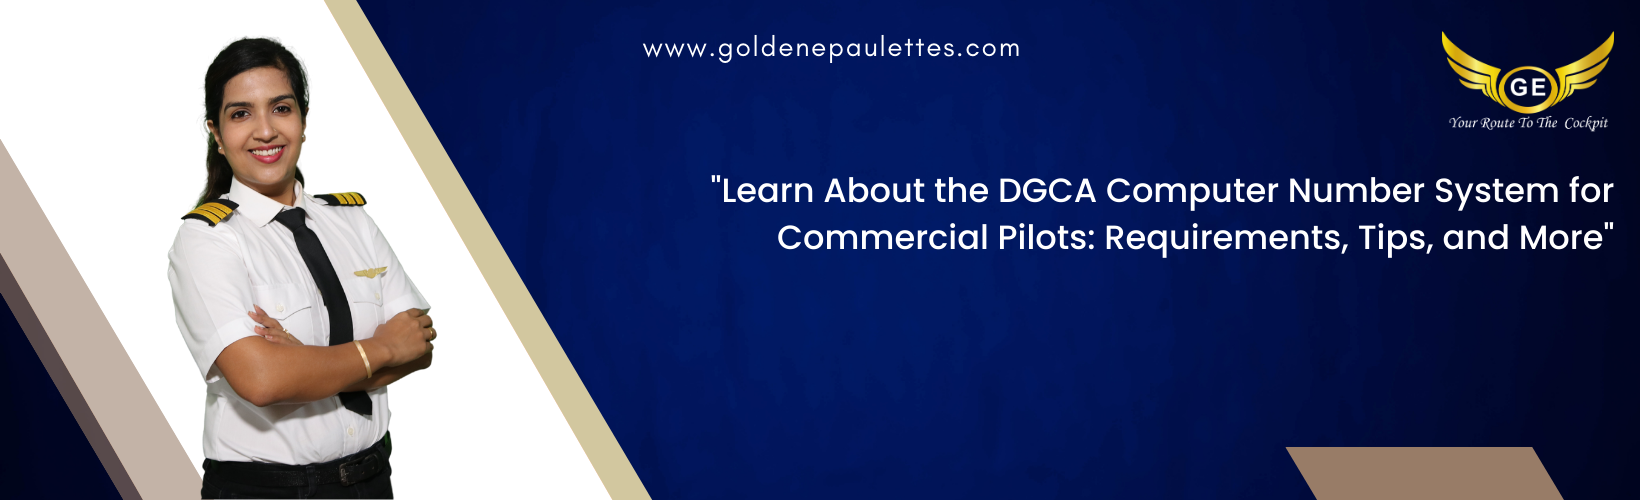 Understanding the DGCA Computer Number System for Commercial Pilots